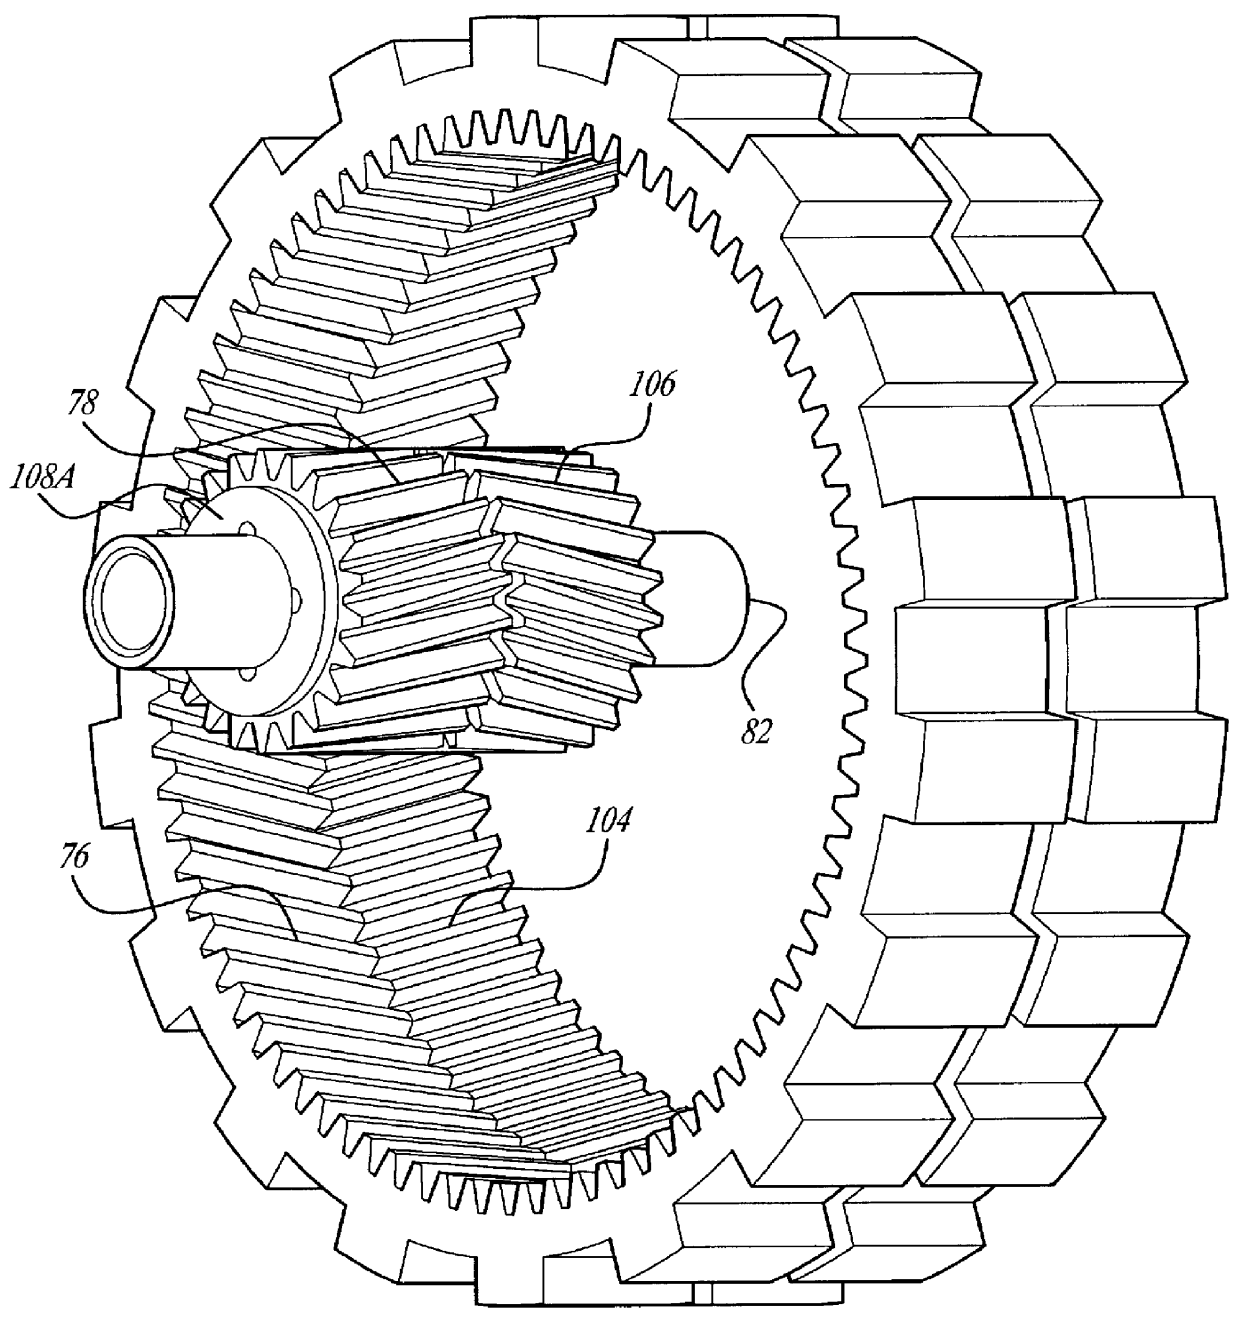 Split helical planetary gear assembly